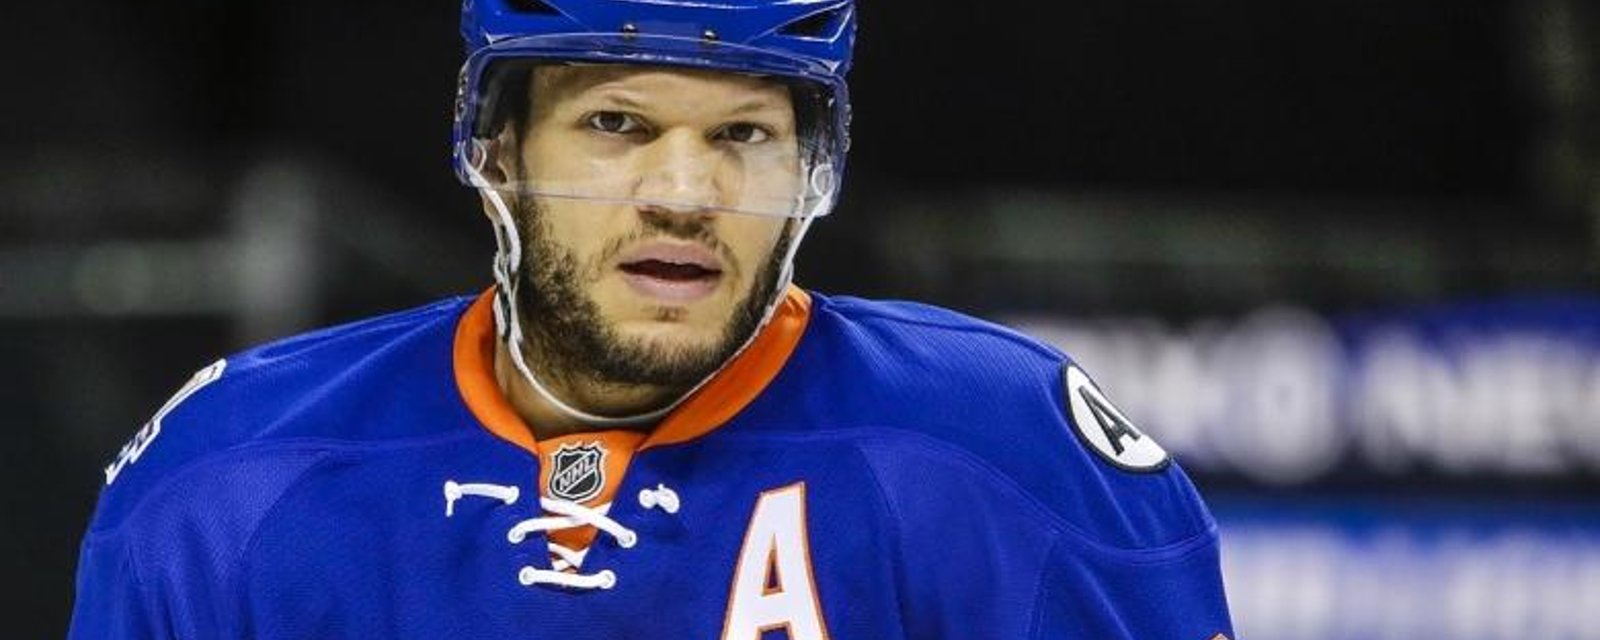 Okposo's agent all but confirms his client will not re-sign.